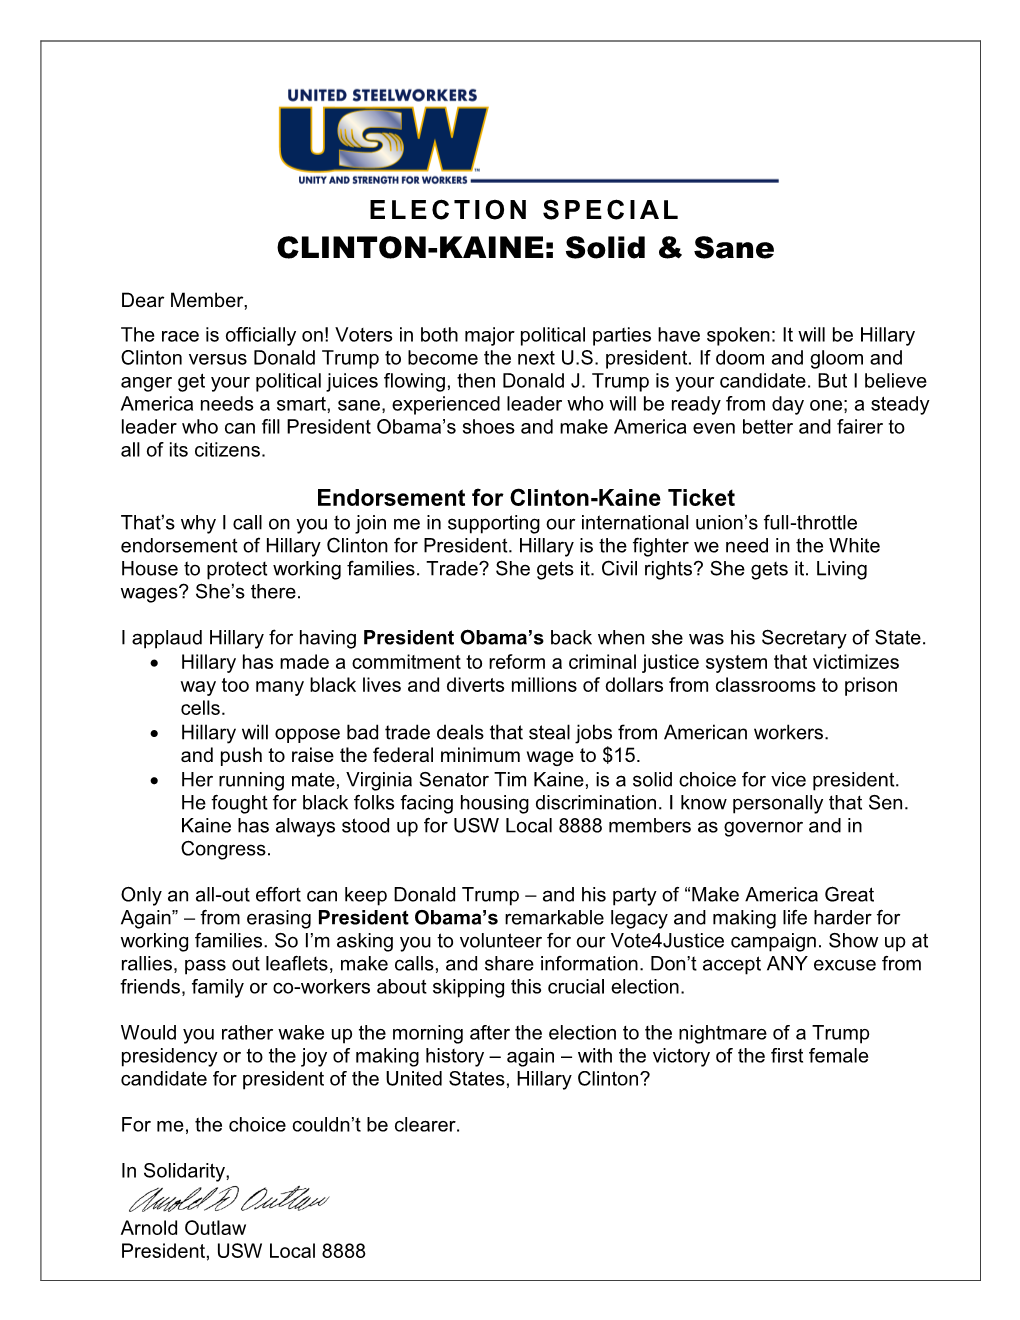 ELECTION SPECIAL CLINTON-KAINE: Solid & Sane